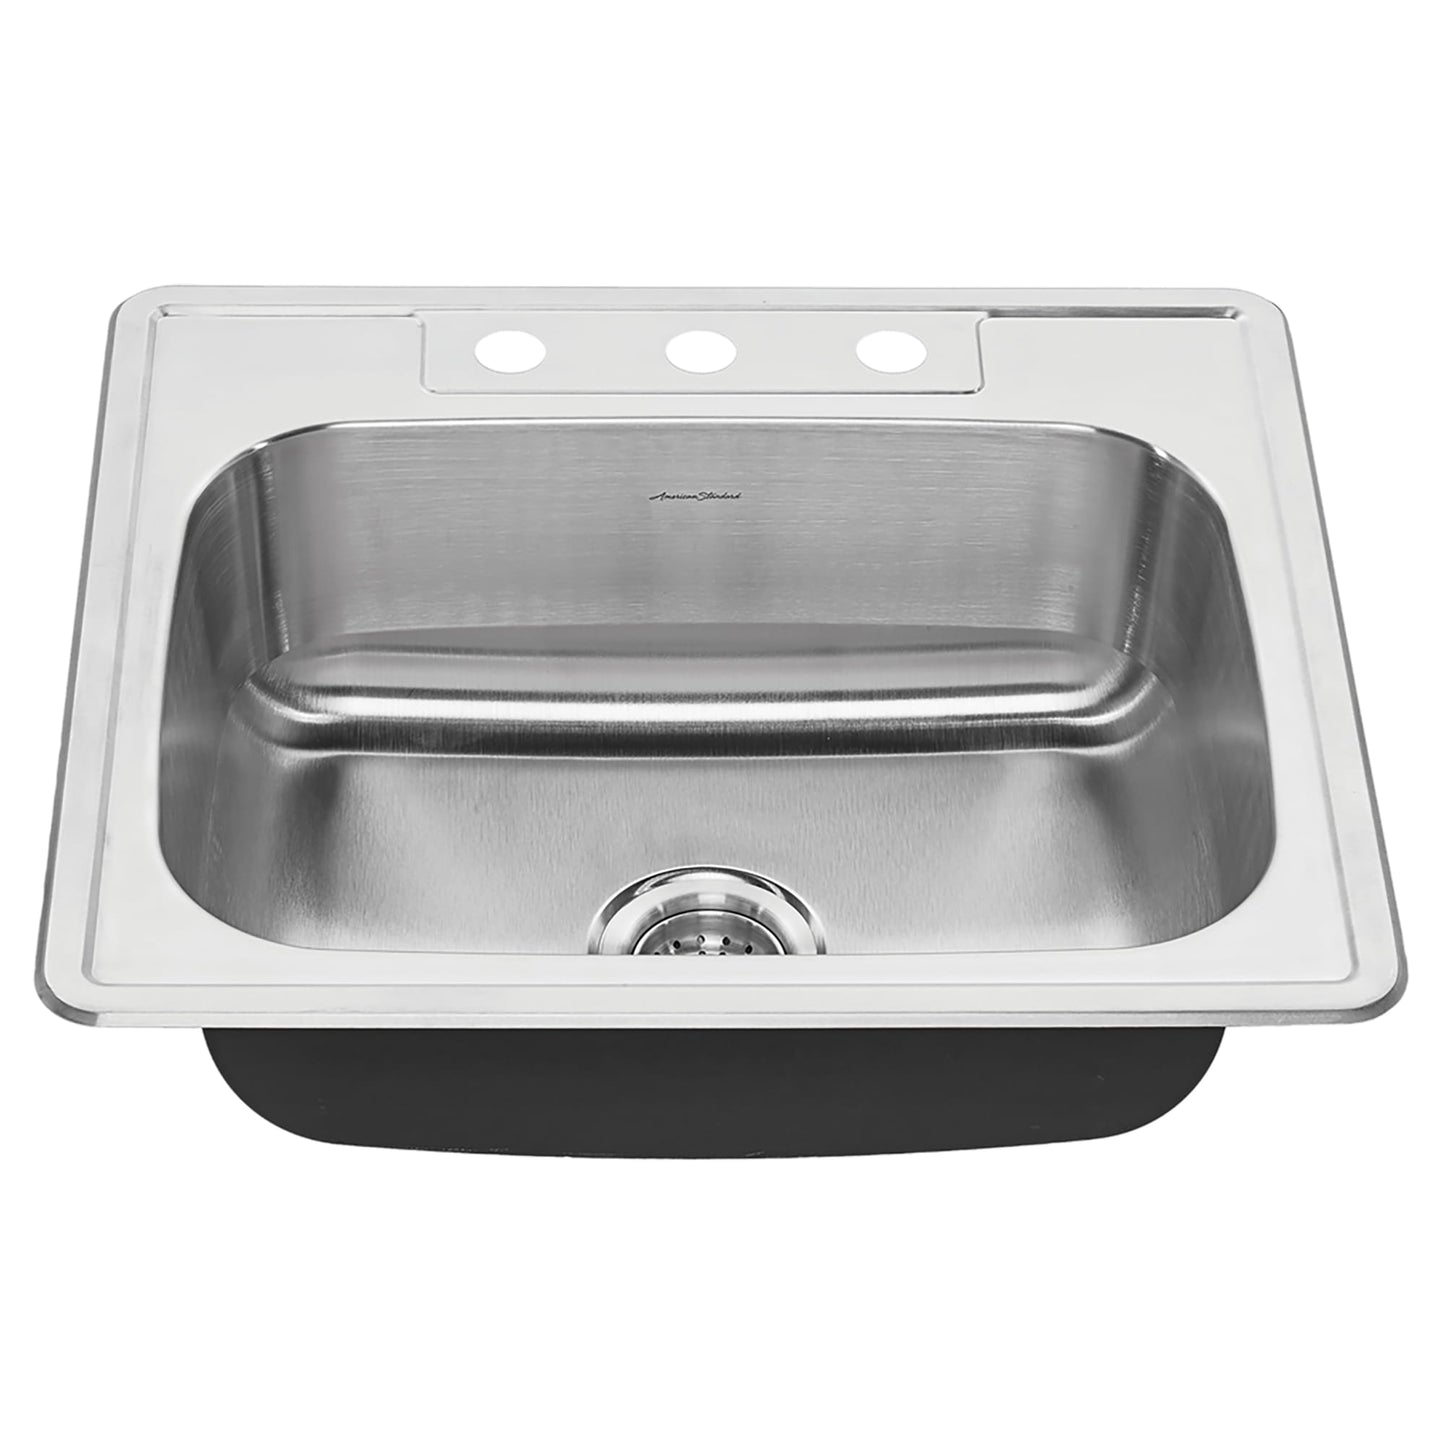 American Standard Colony® 25 x 22-Inch Stainless Steel 3-Hole Top Mount Single-Bowl ADA Kitchen Sink - 22SB.6252283S